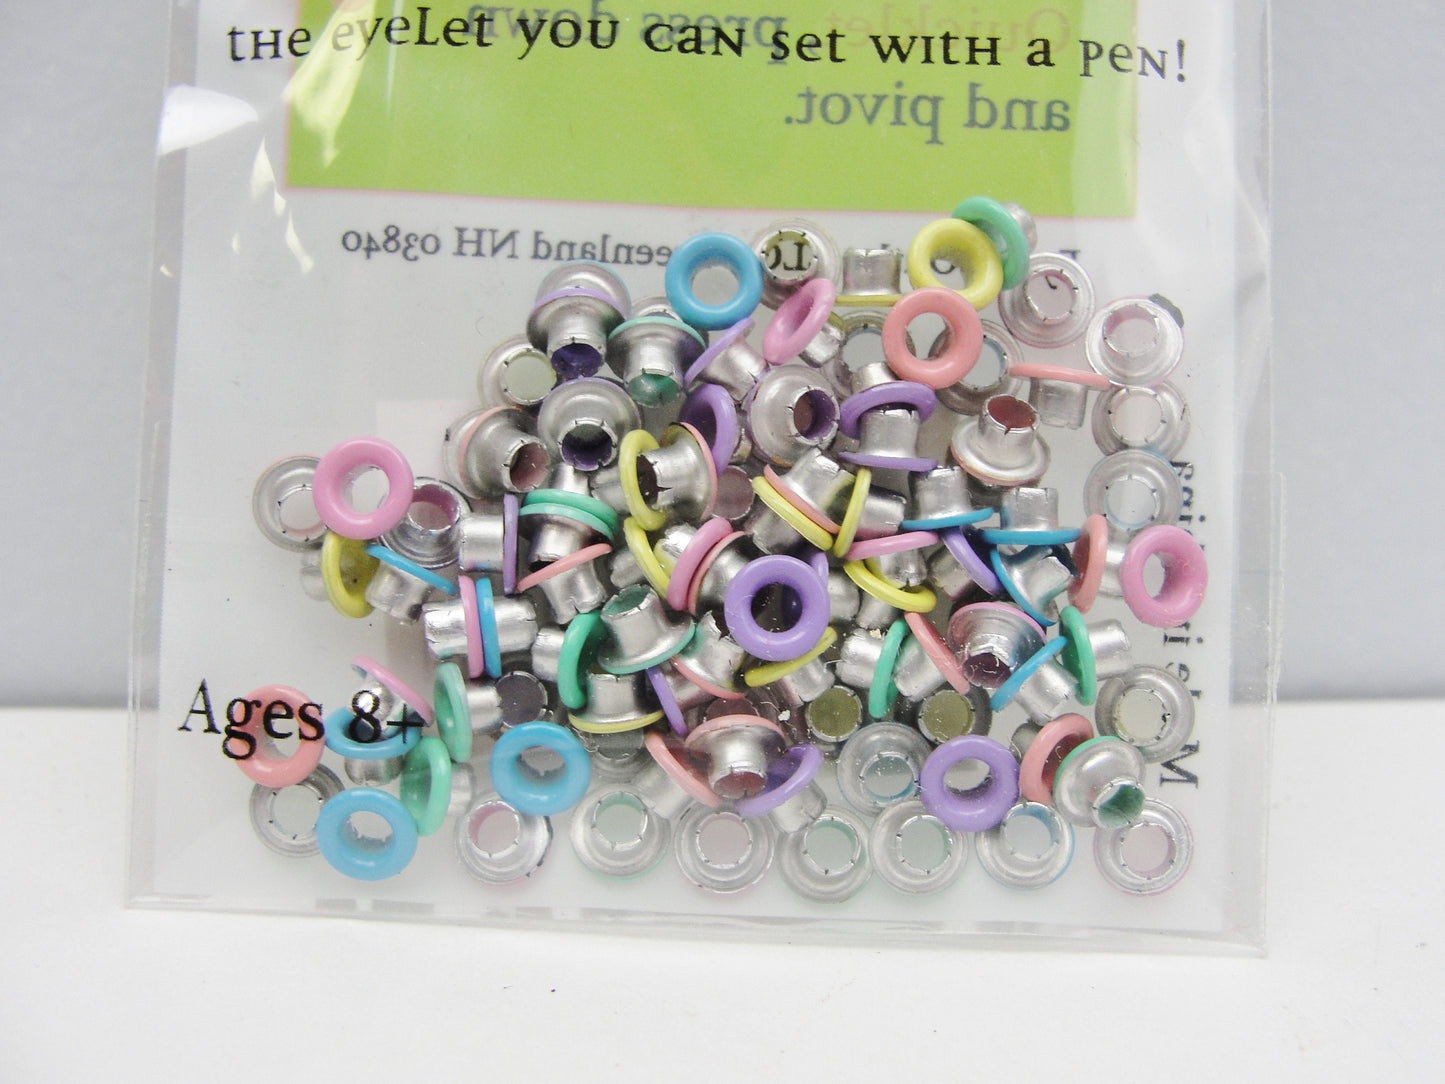 1/8"  Quicklets Eyelets (no special tools required) choose your color